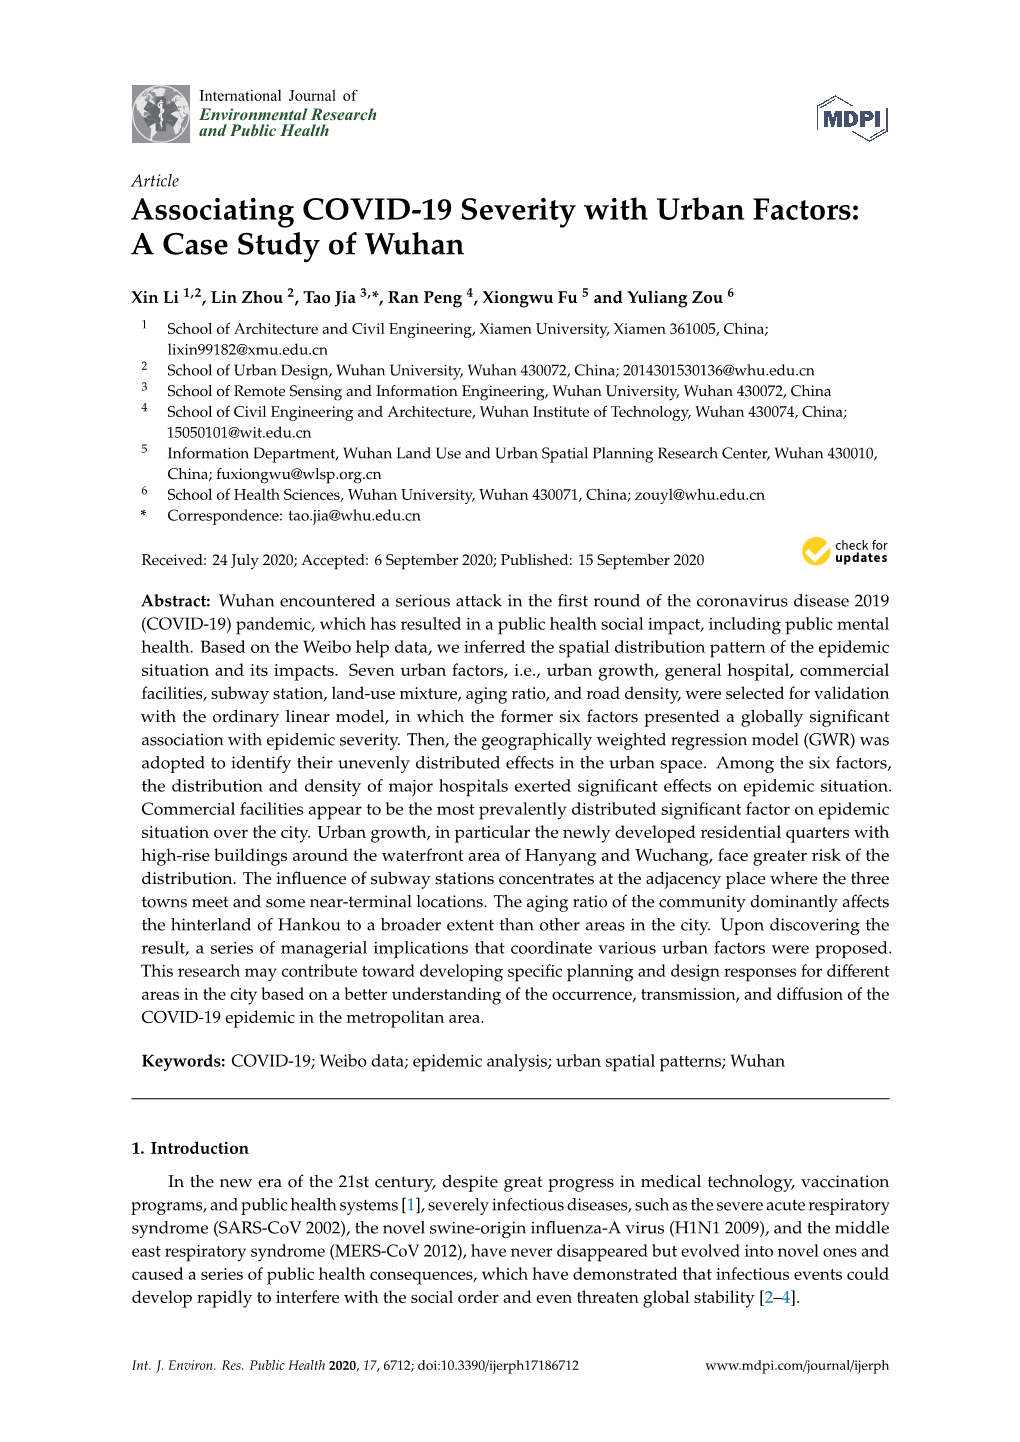 Associating COVID-19 Severity with Urban Factors: a Case Study of Wuhan